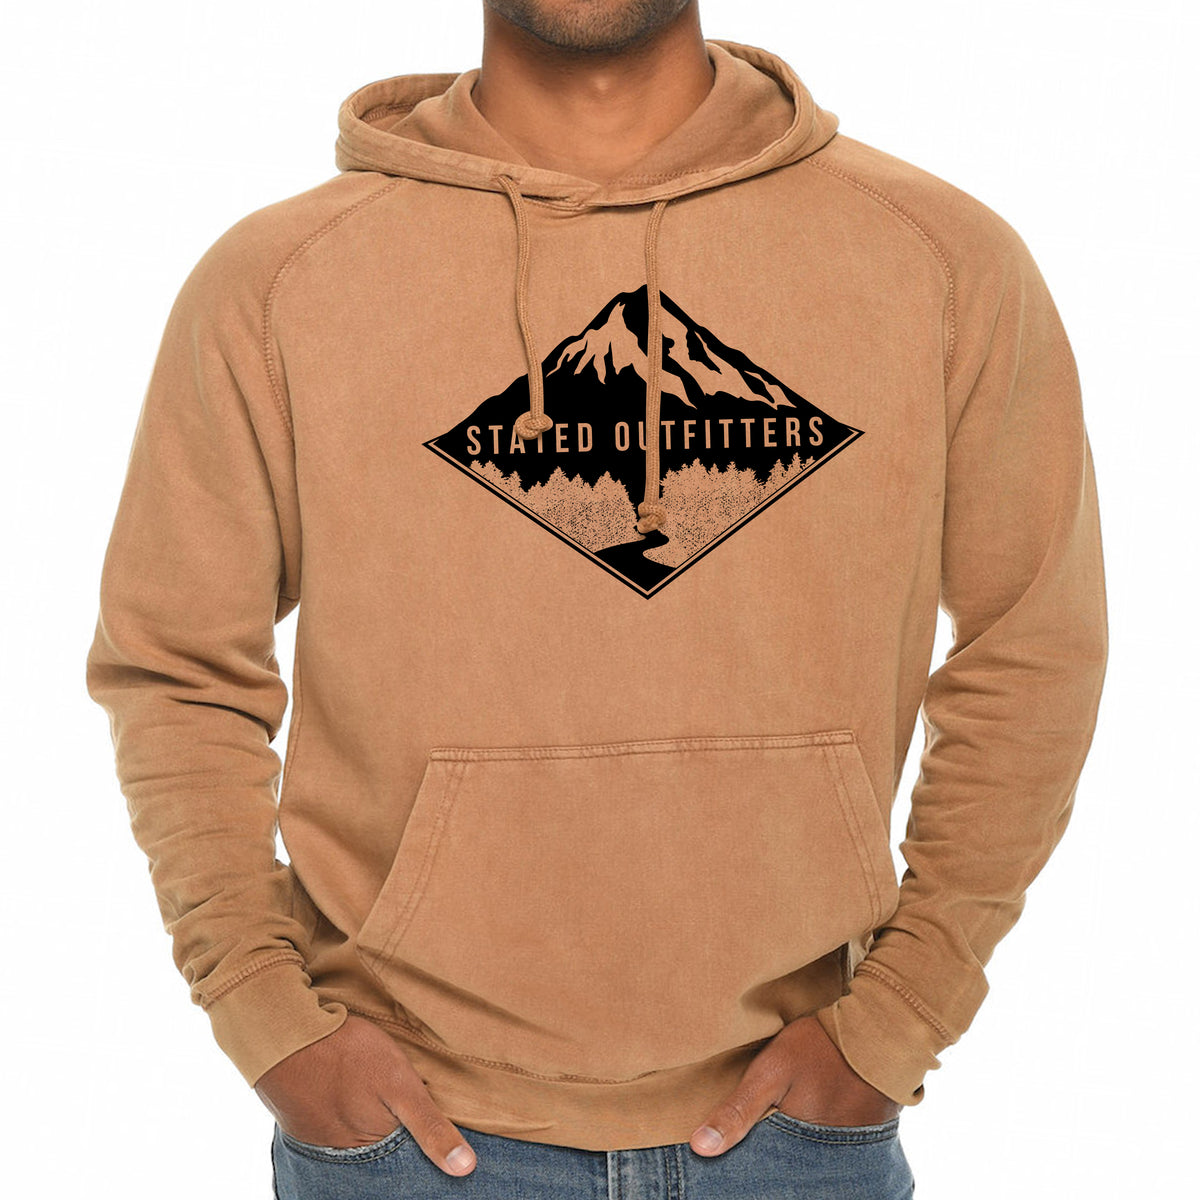 Stated Outfitters Mountain Hoodie